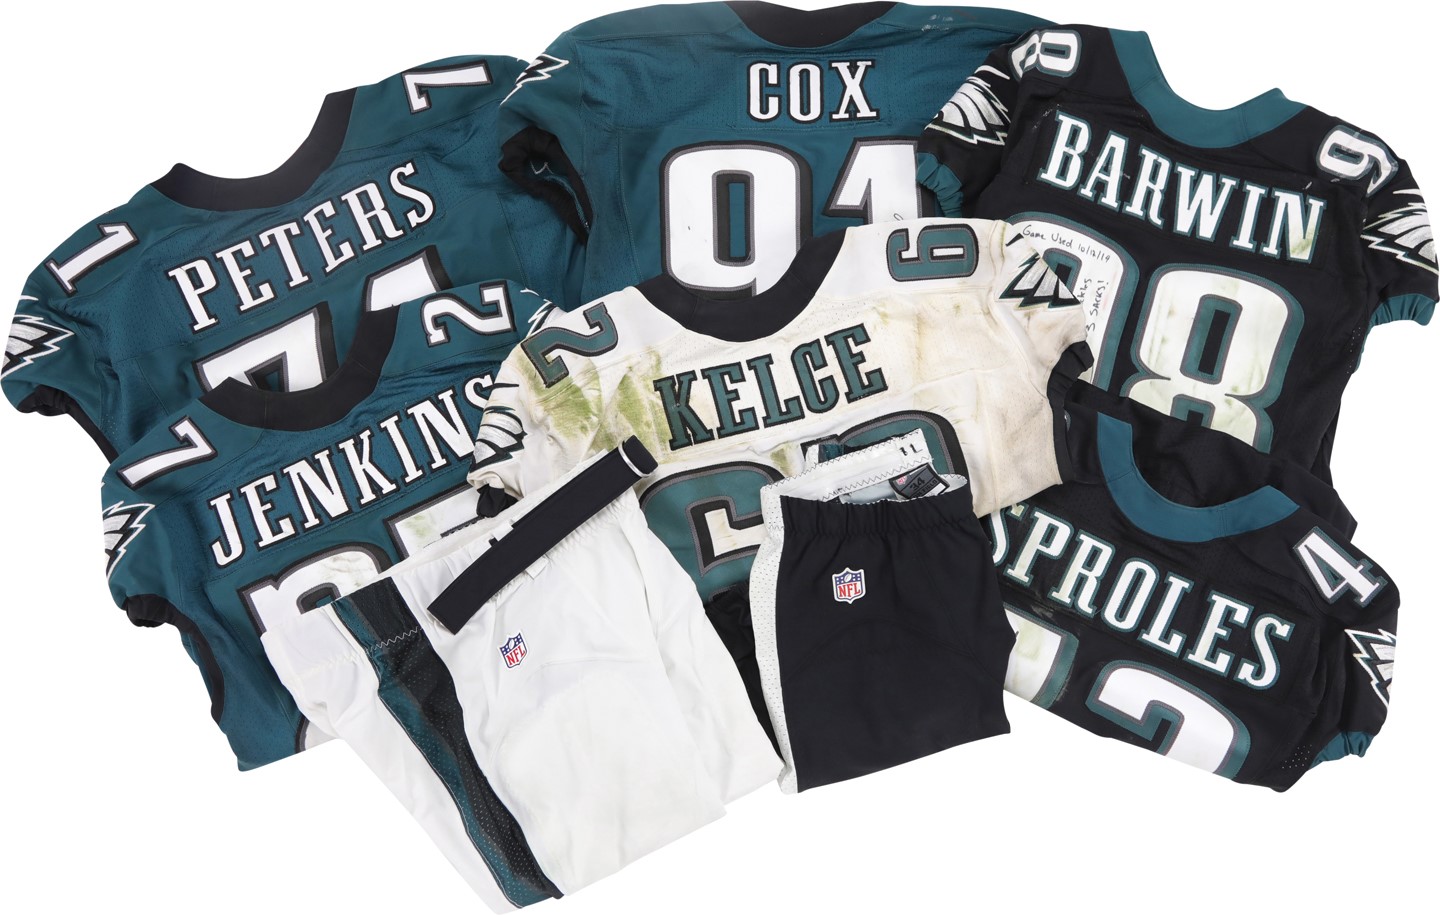 The Philadelphia Eagles Collection - 2014-2016 Philadelphia Eagles Superstars Game Worn Jersey Archive - Some Photo-Matched! (6)